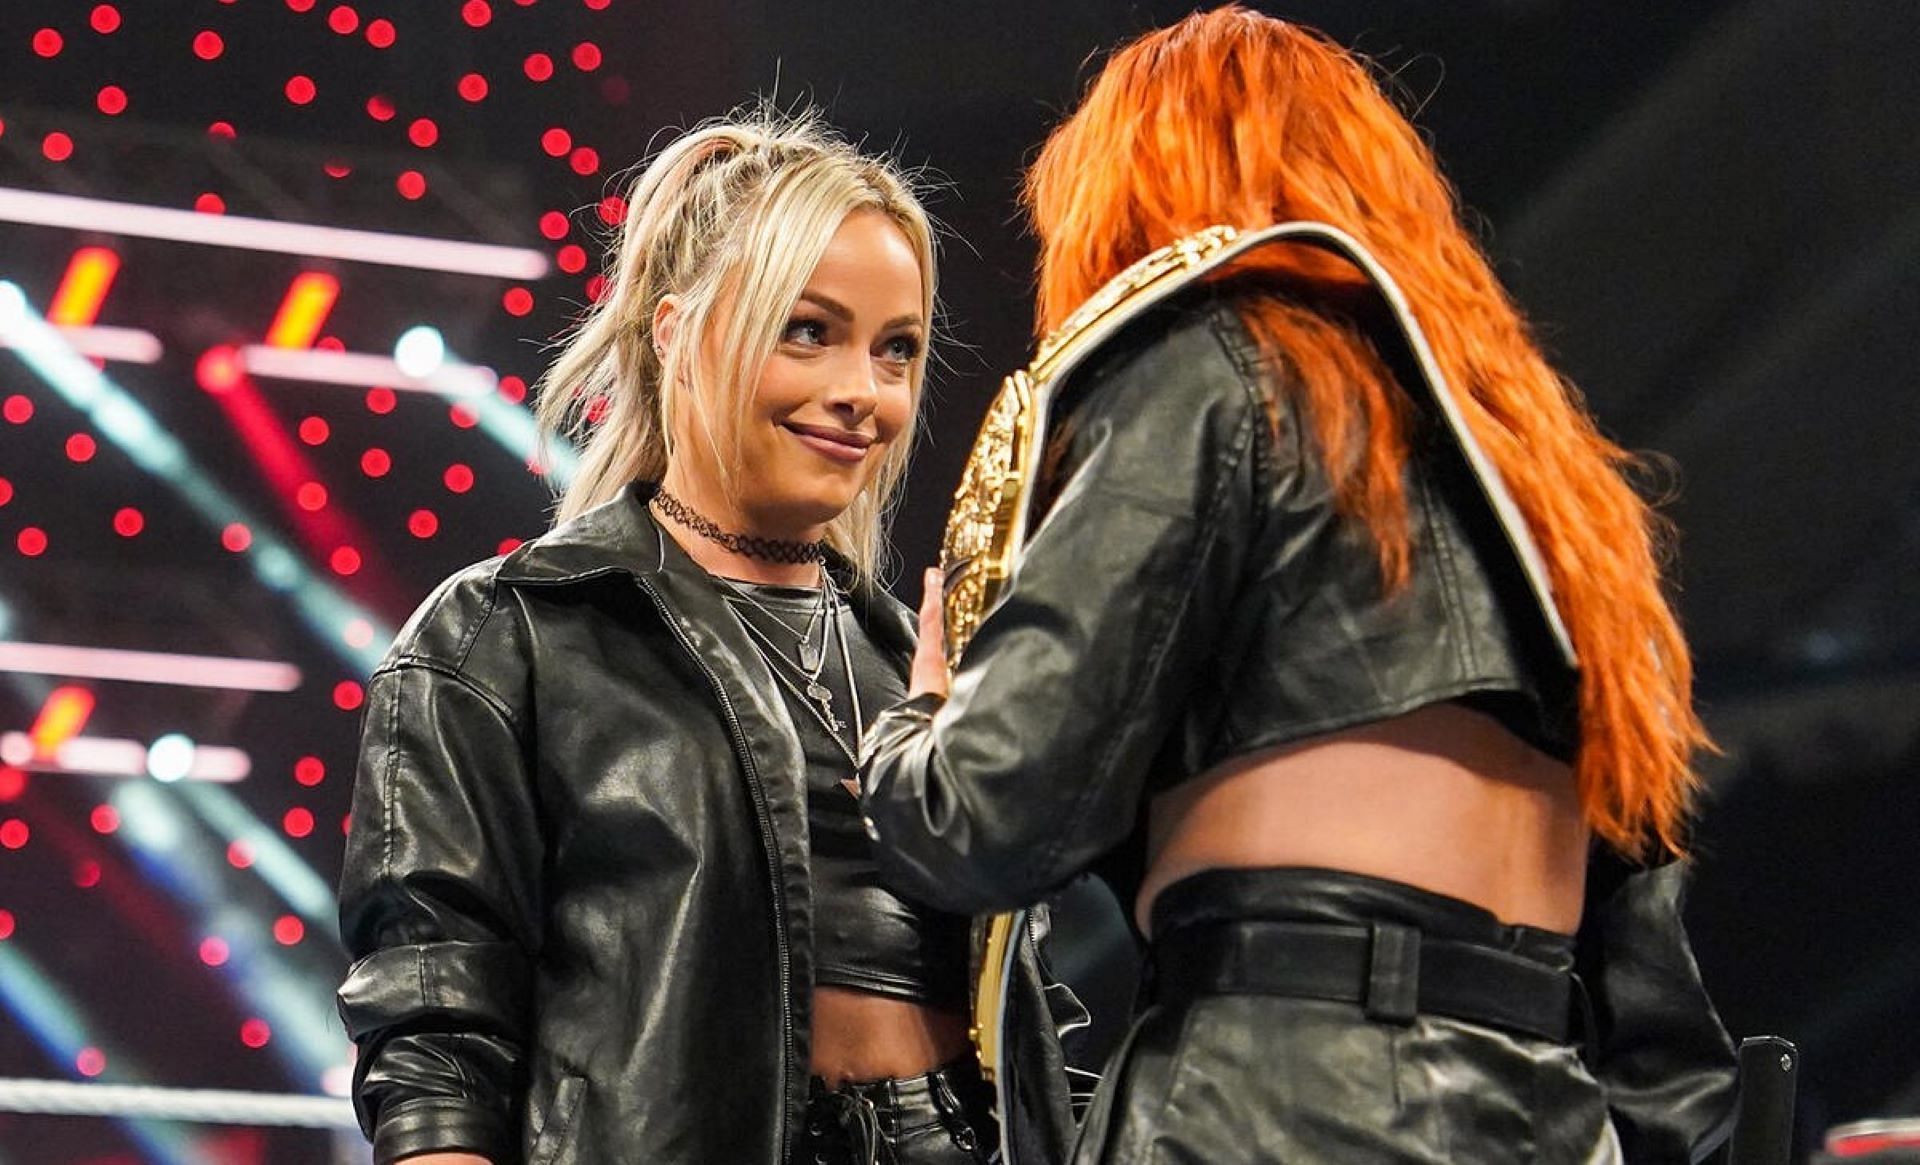 Liv Morgan likes to cause havoc in WWE.